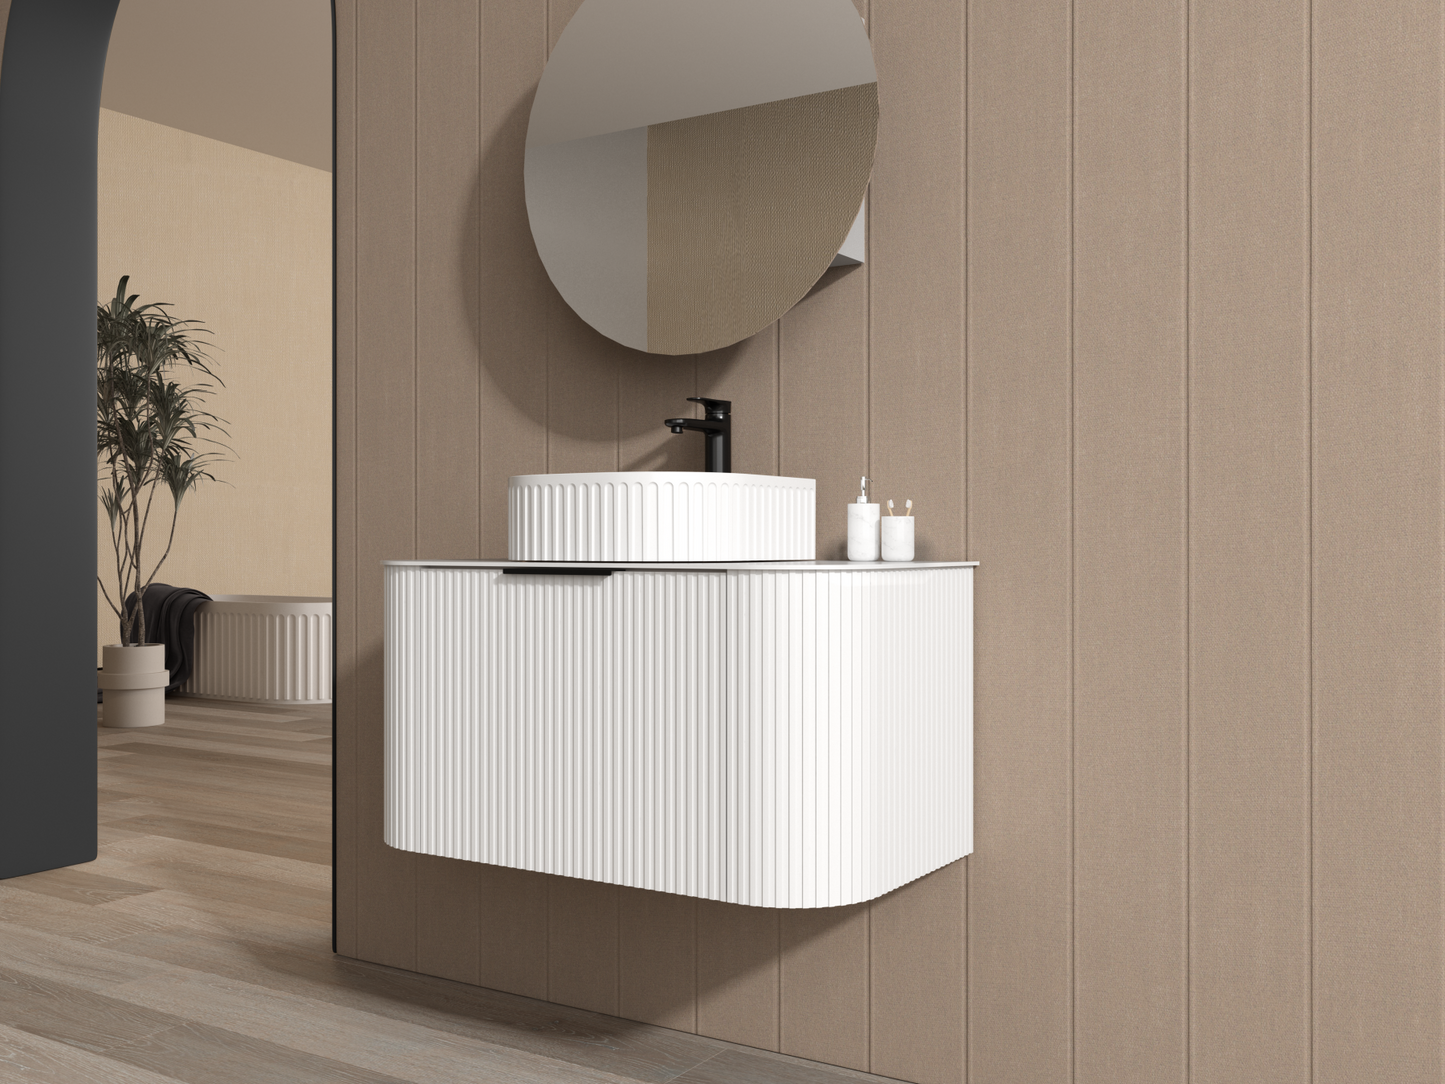 Manto Wall-mounted Curved Fluted Facade Engineered Stone Countertop Inspired by Greek Columns Bathroom Vanity Set，White